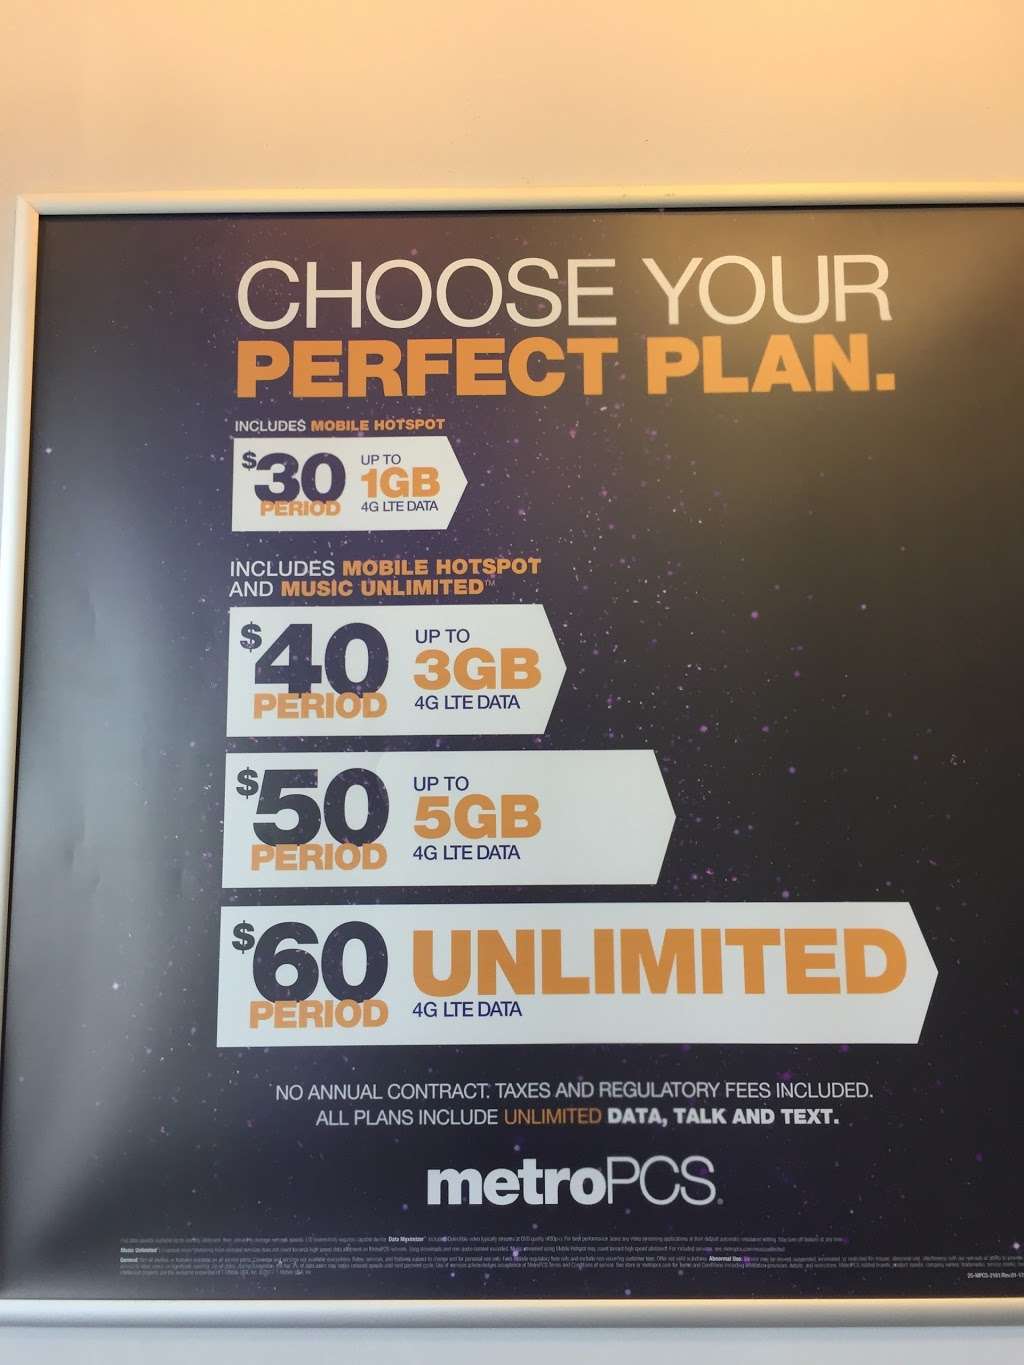 Metro by T-Mobile | 8403 Michigan Rd Ste B, Indianapolis, IN 46268 | Phone: (317) 672-2458